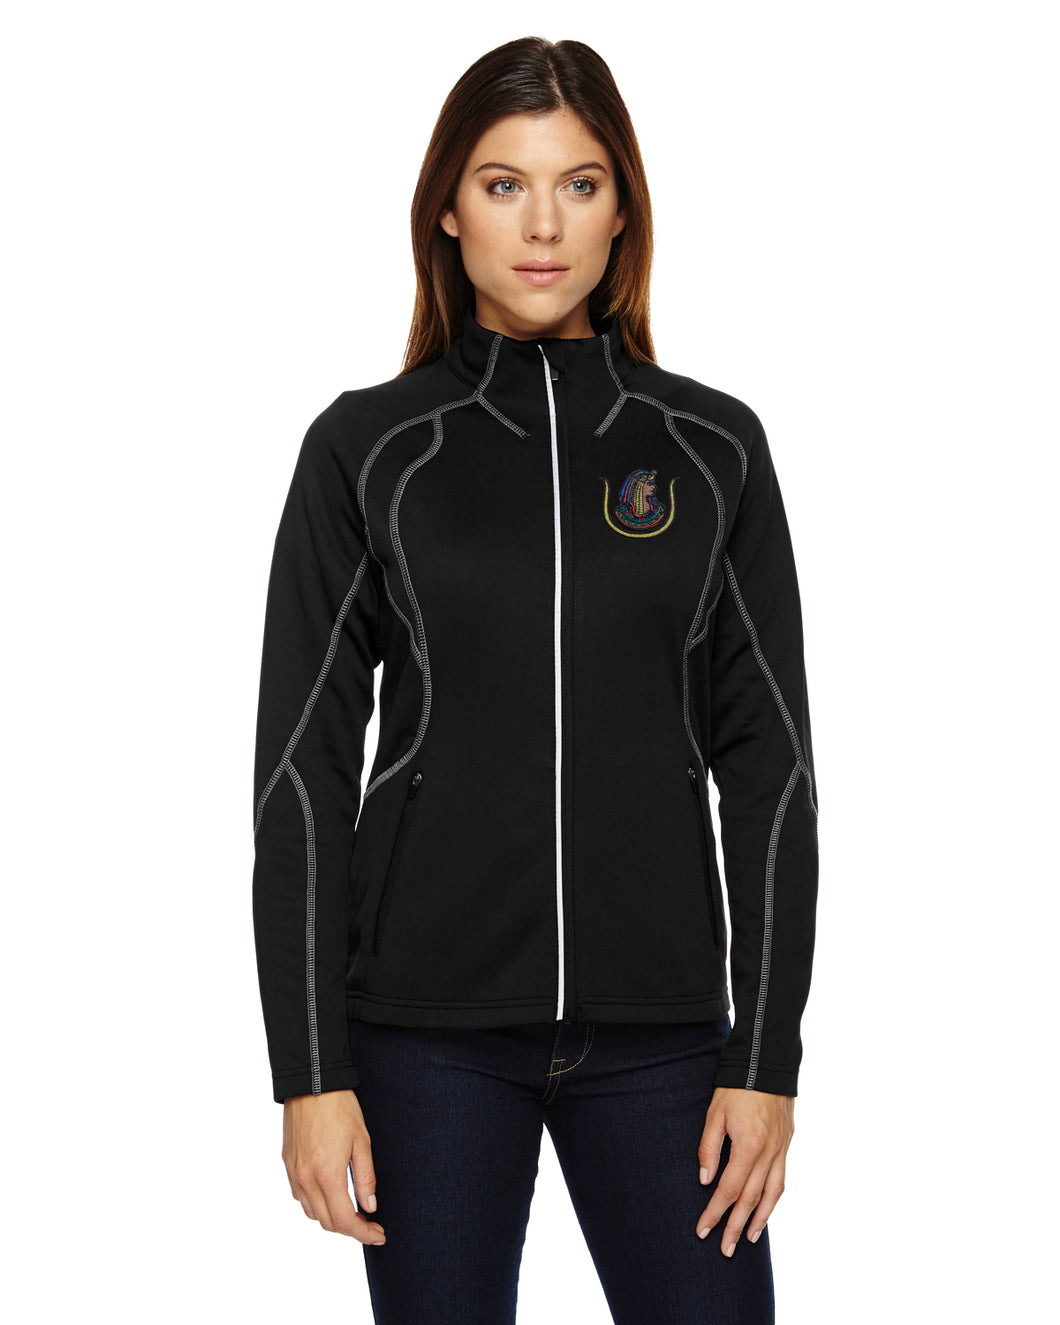 Daughters of Isis Women's Jacket with Embroidered Logo